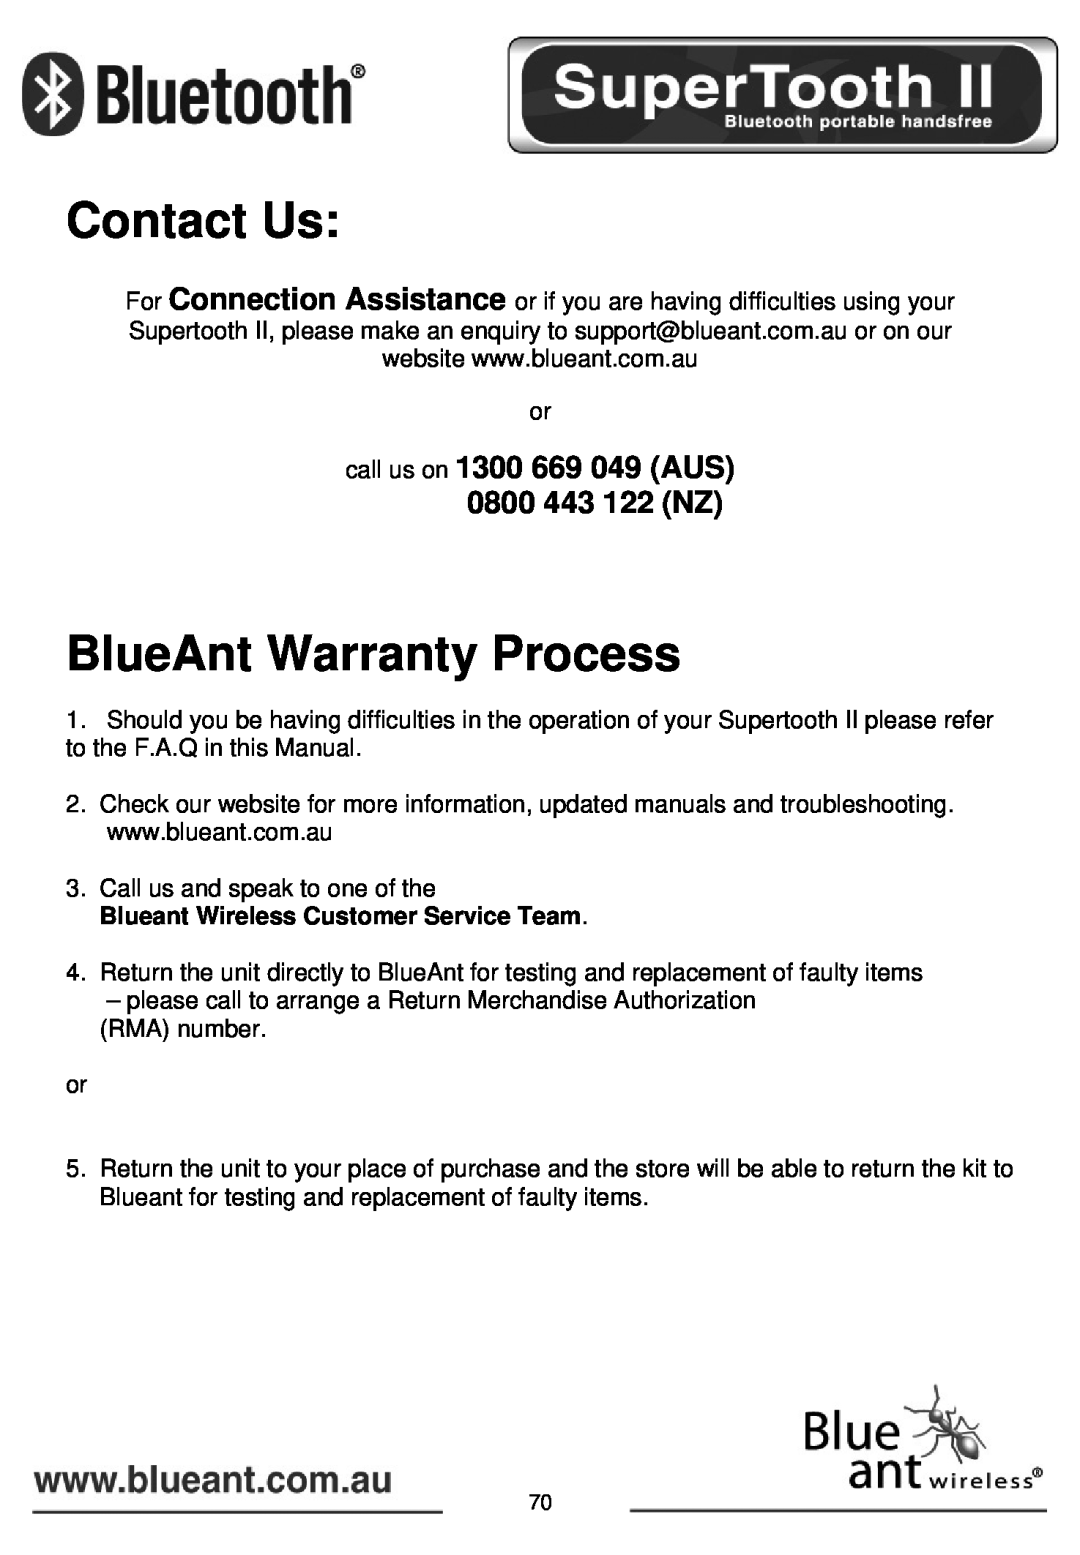 BlueAnt Wireless SUPERTOOTH II manual Contact Us, BlueAnt Warranty Process, call us on 1300 669 049 AUS 0800 443 122 NZ 